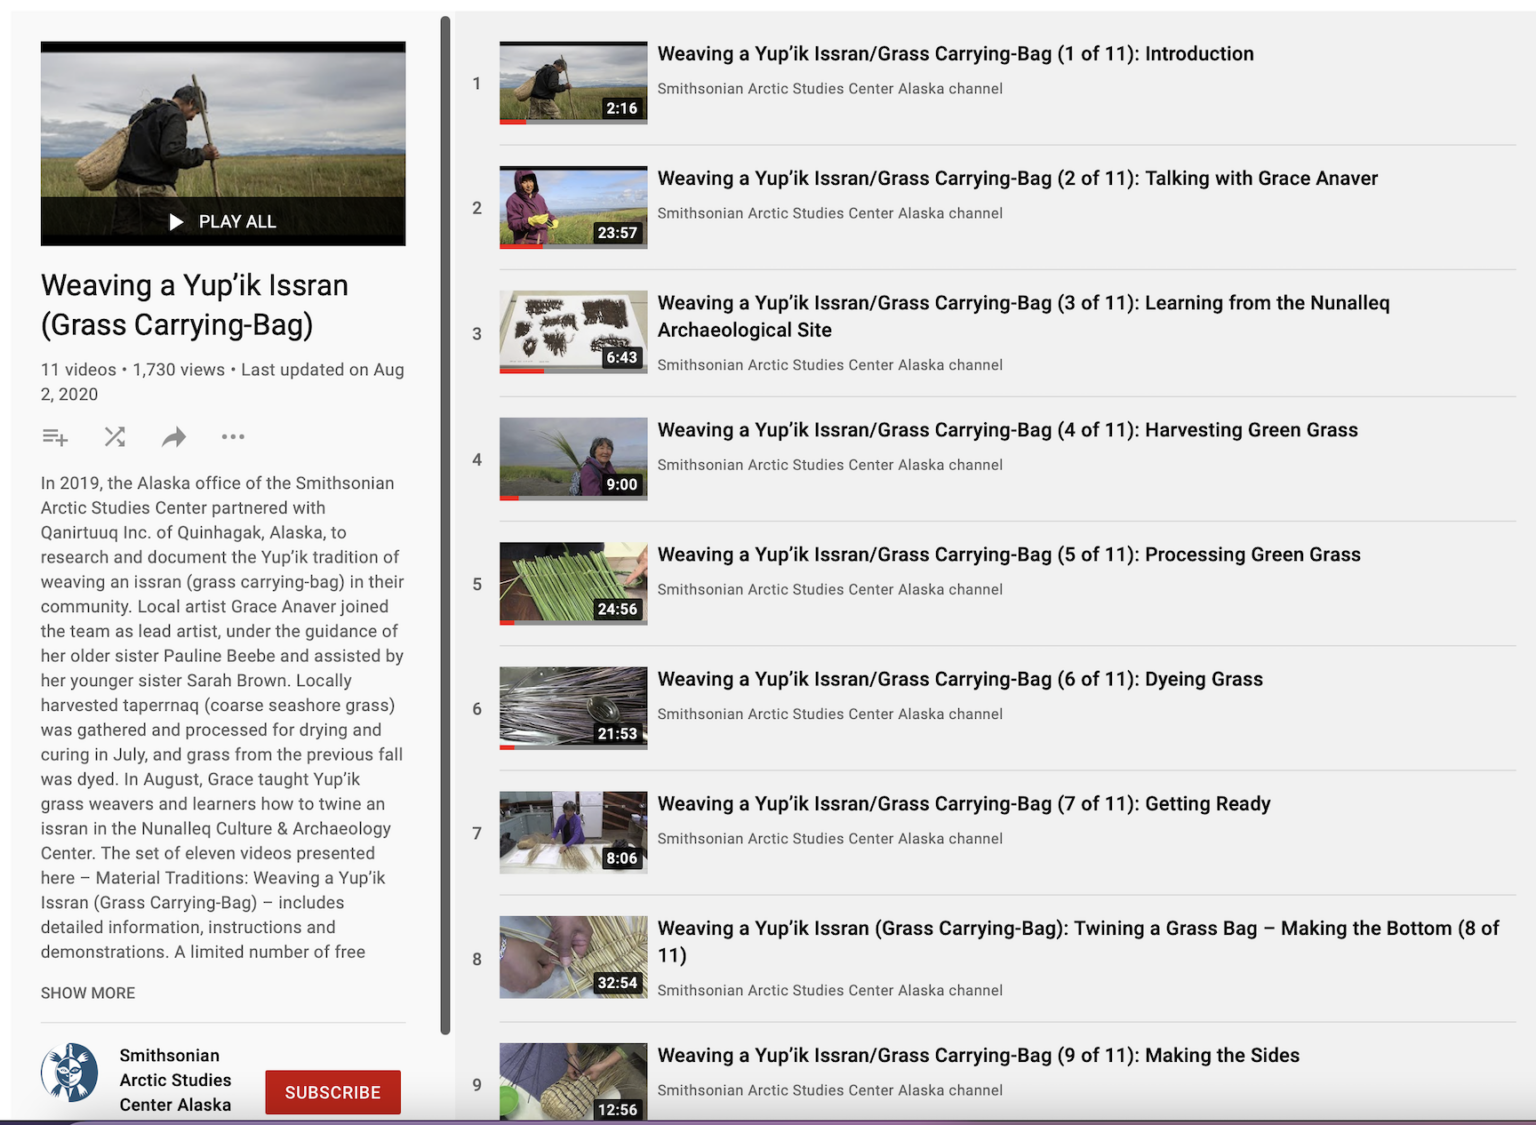 Screenshot showing a number of videos related to grass basket weaving